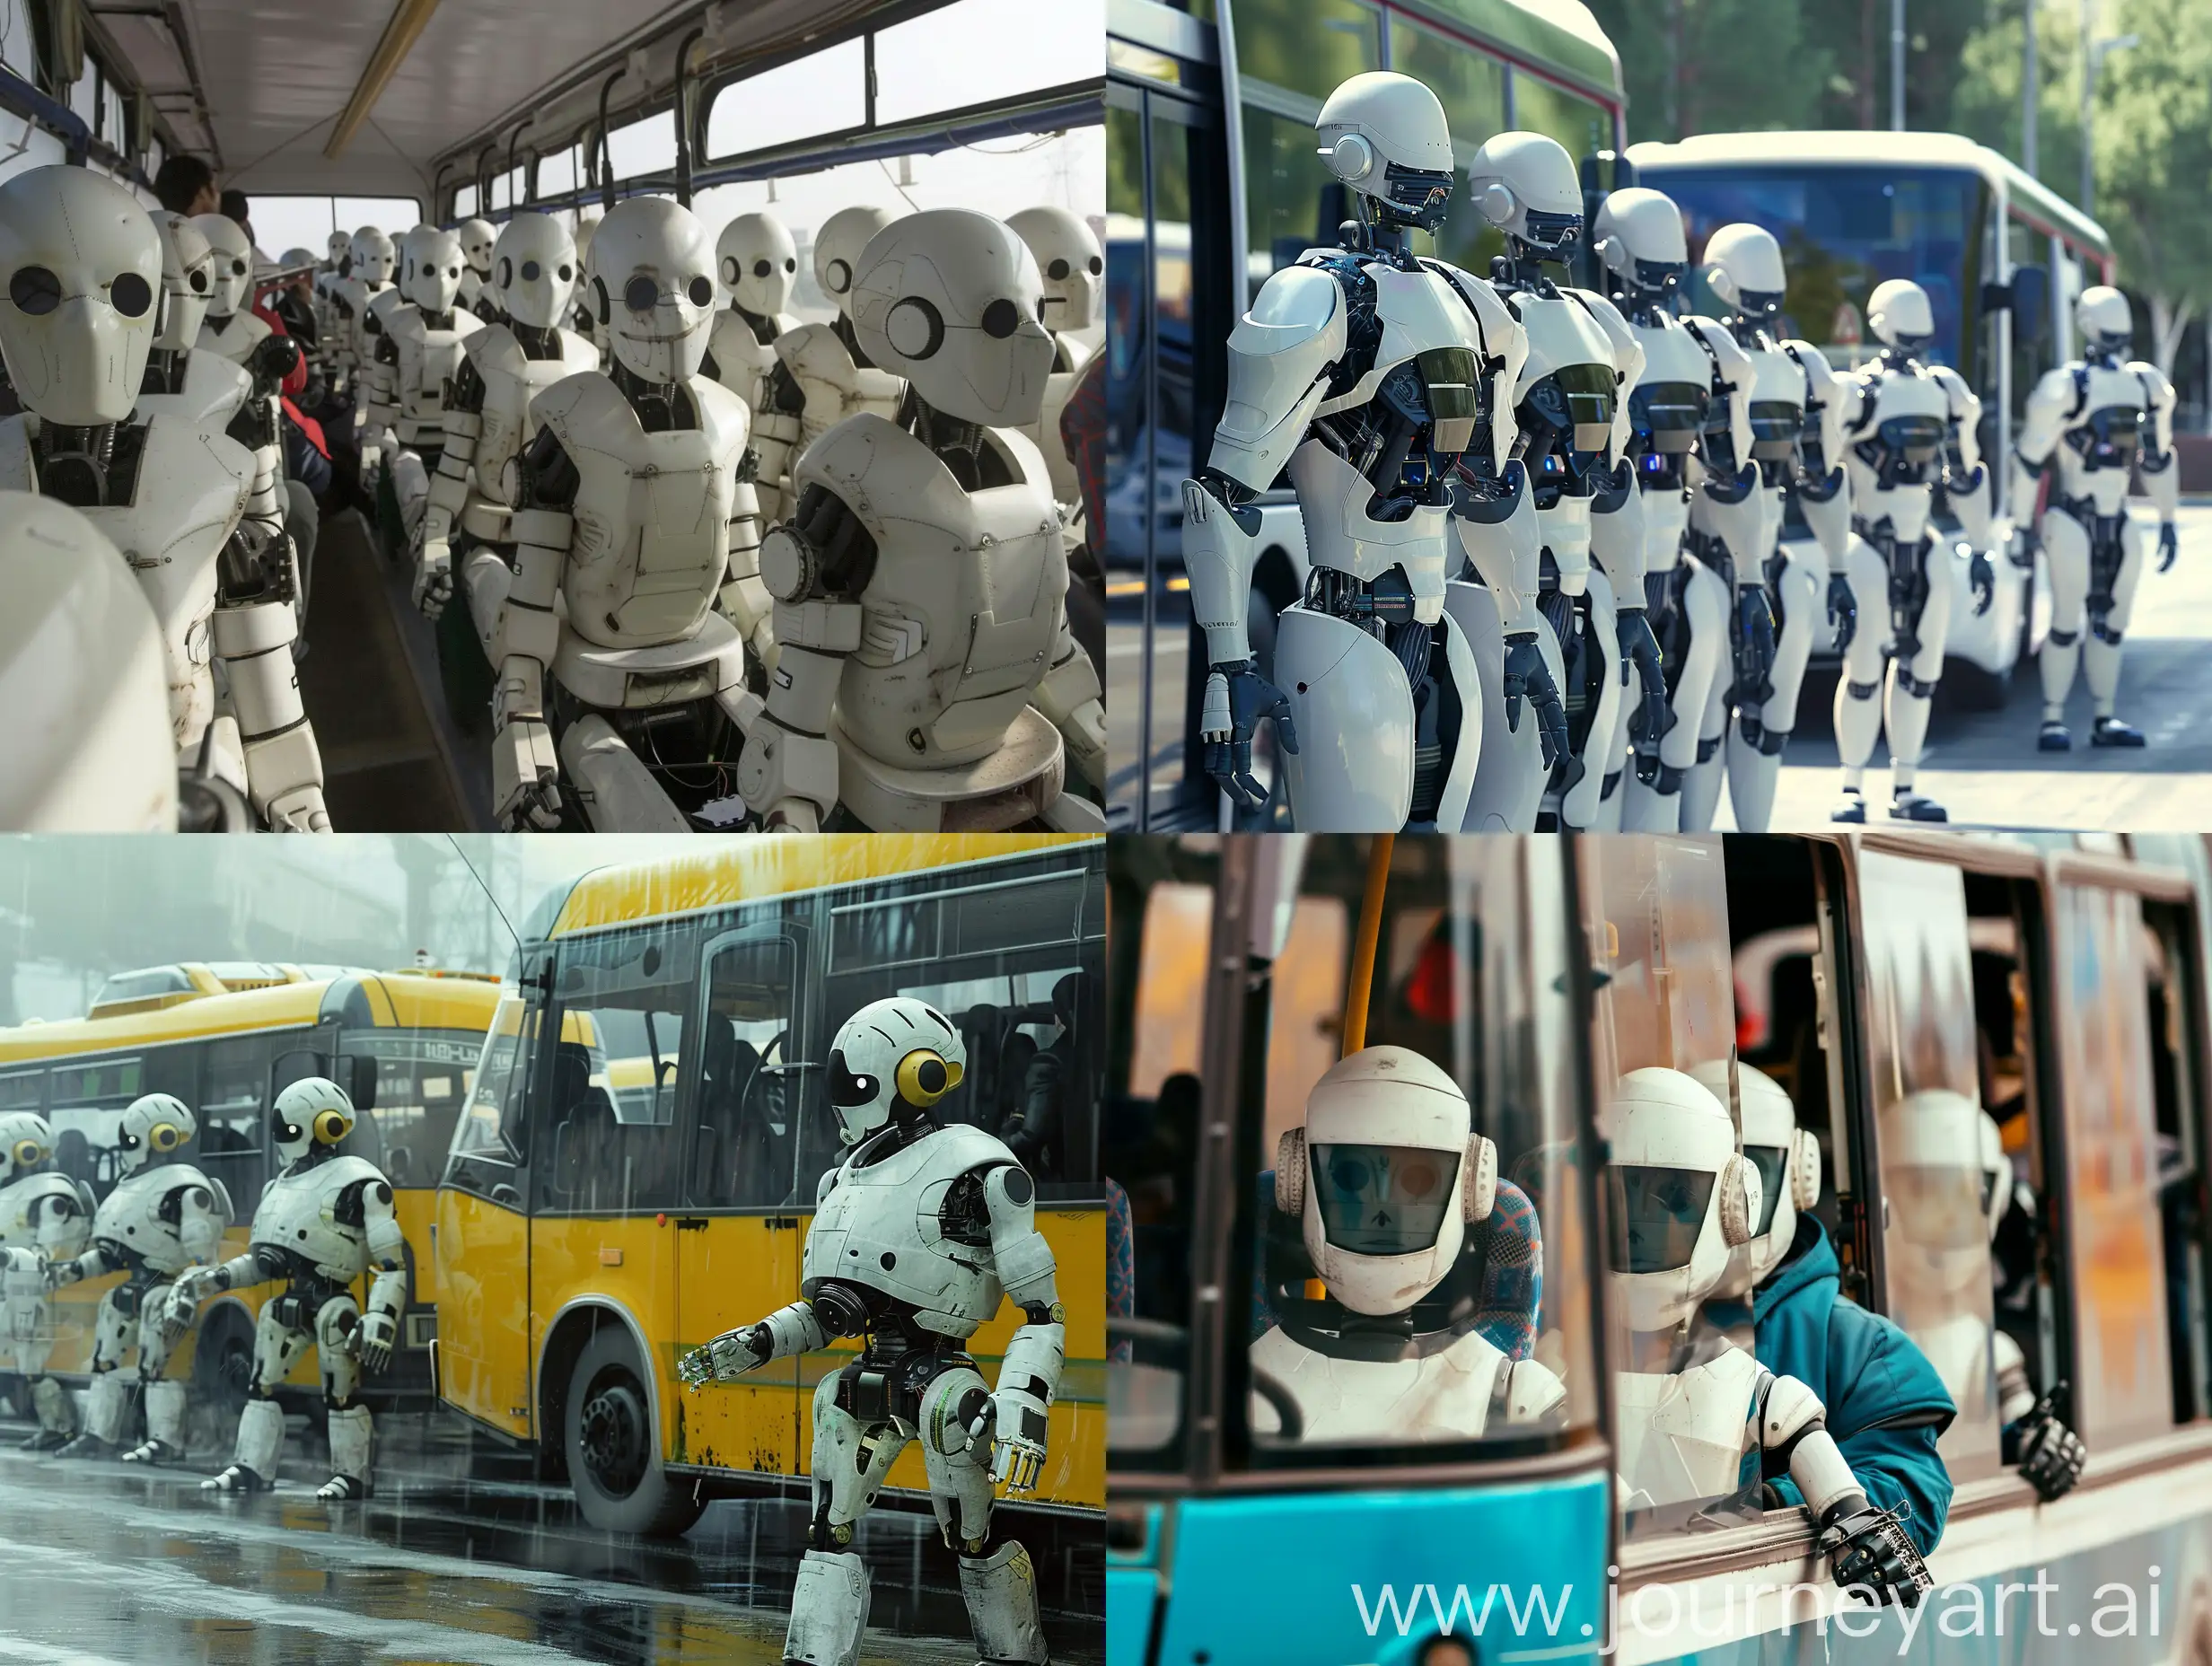 Robotic-Commuters-Traveling-to-Work-in-Minibuses